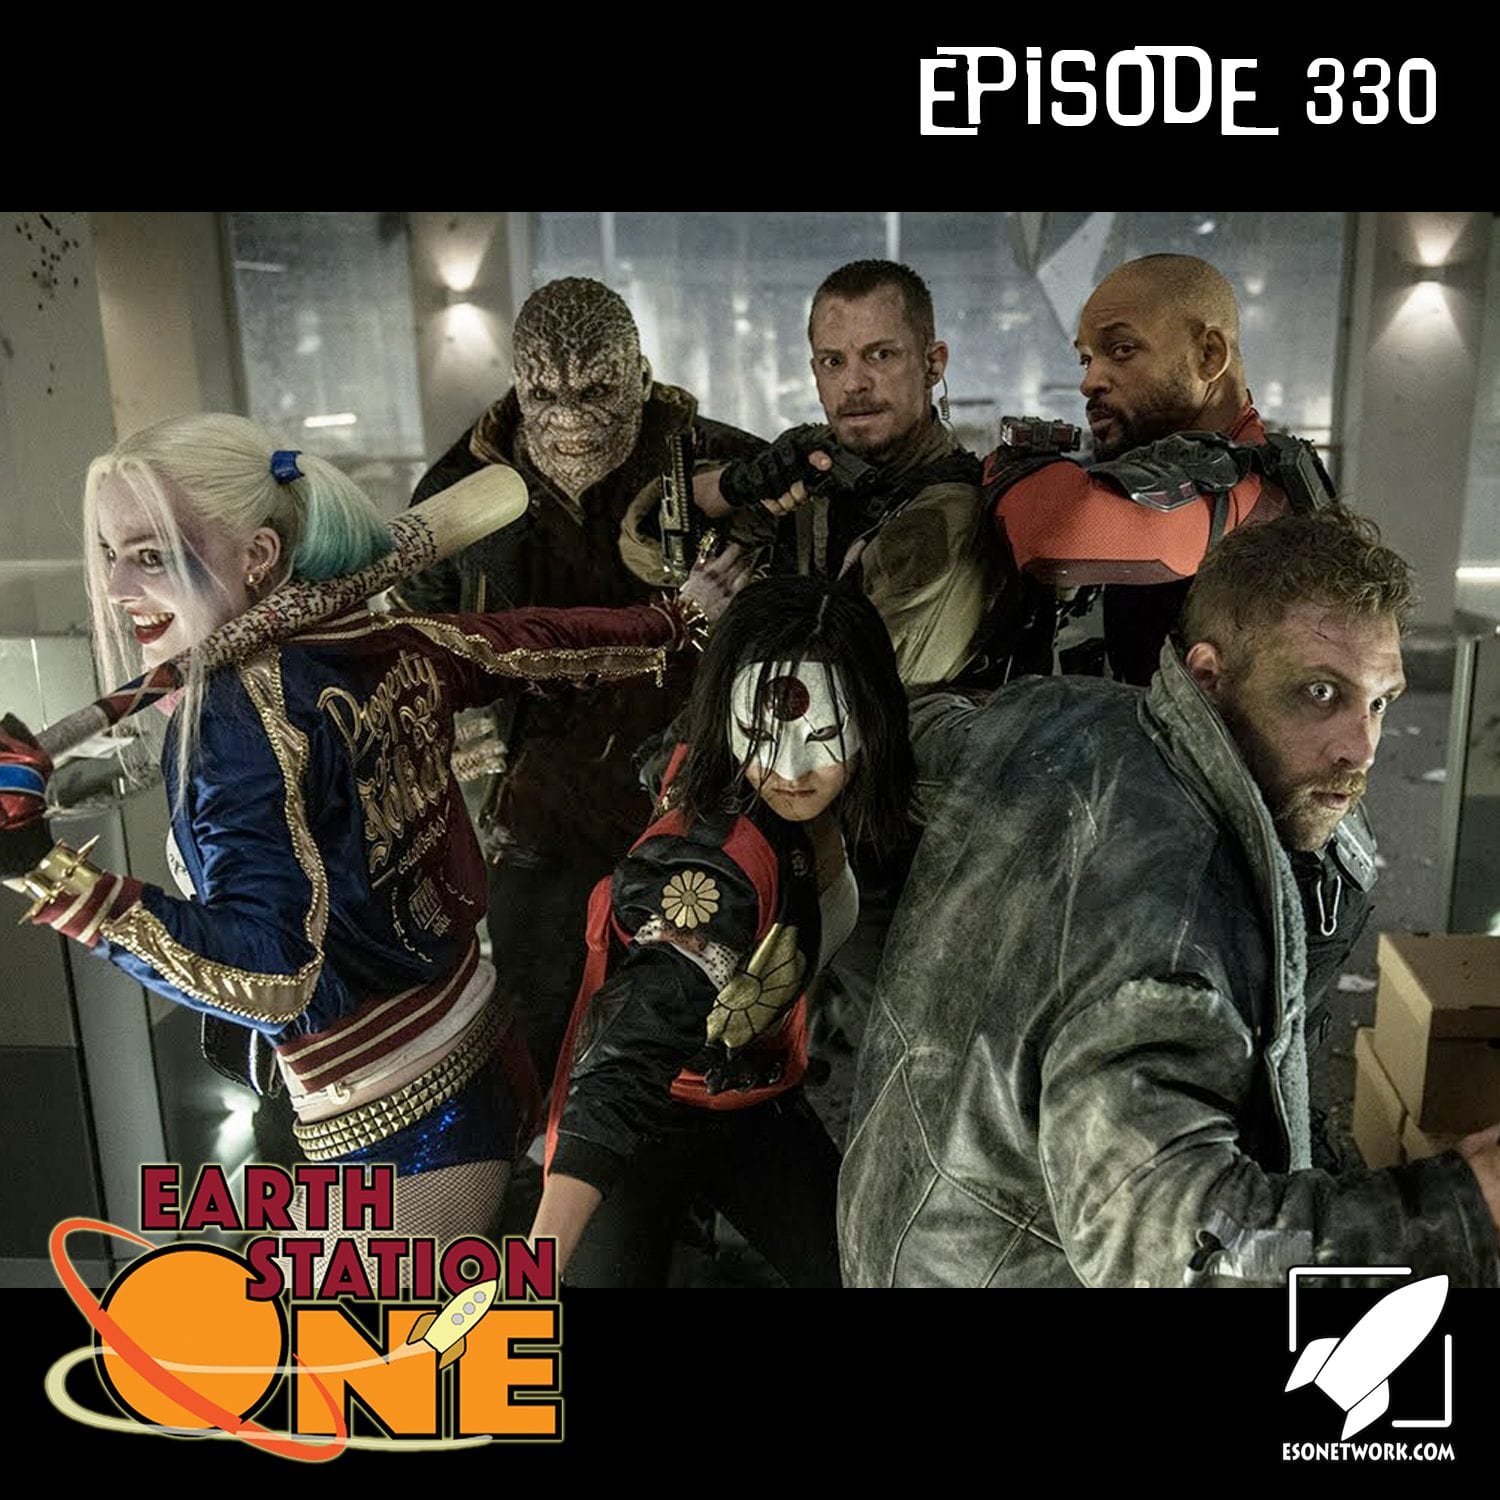 Earth Station One Episode 330